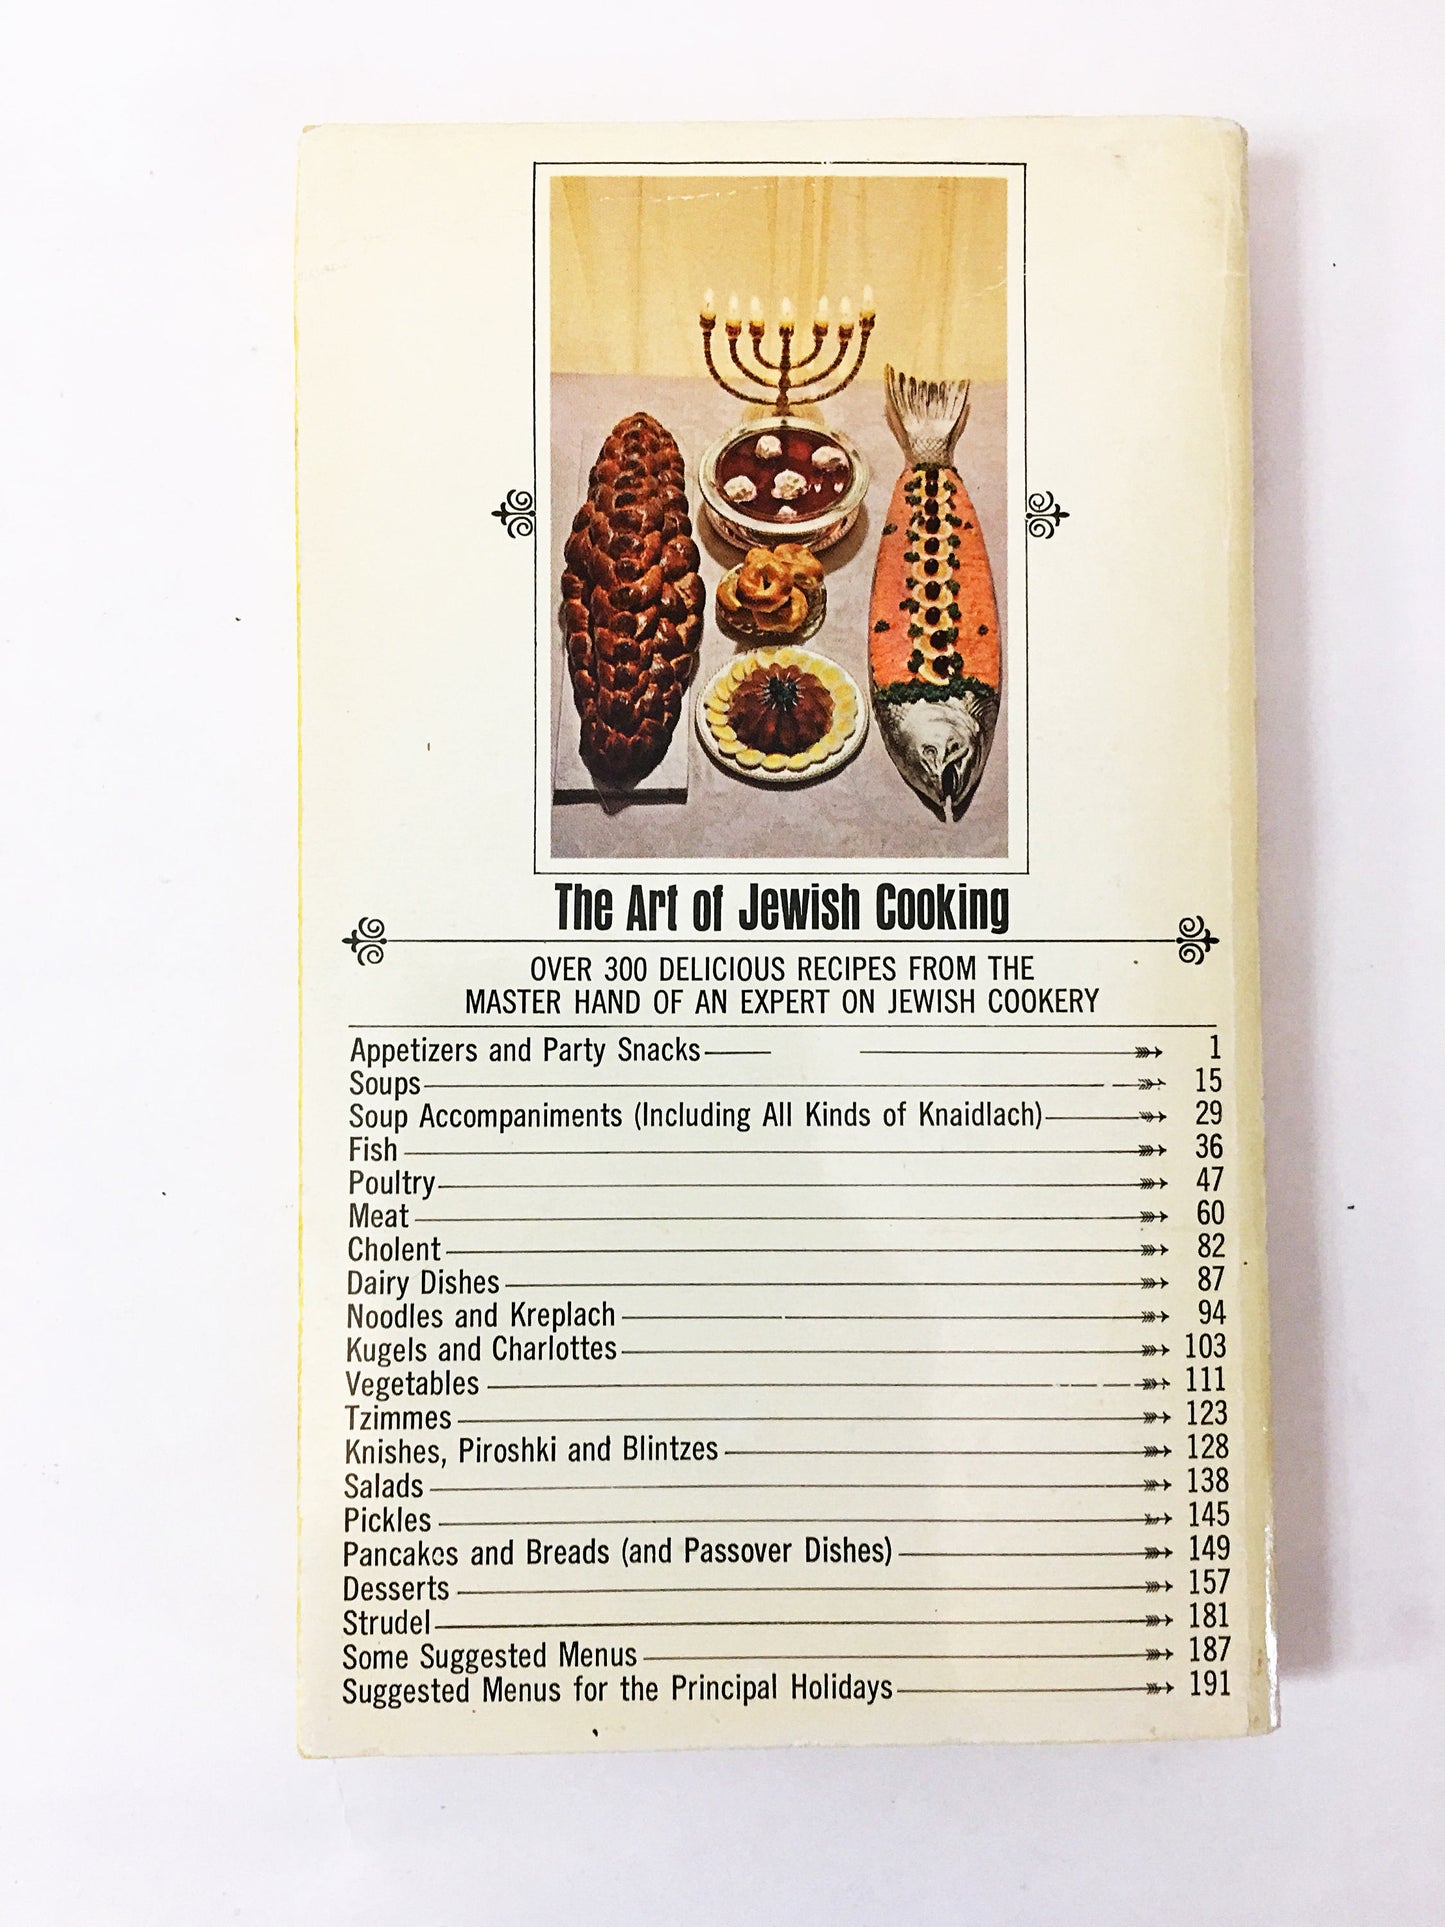 The Art of Jewish Cooking. Jennie Grossinger. Vintage cookbook circa 1977. classic and favorite Jewish recipes. Rosh Hashanah